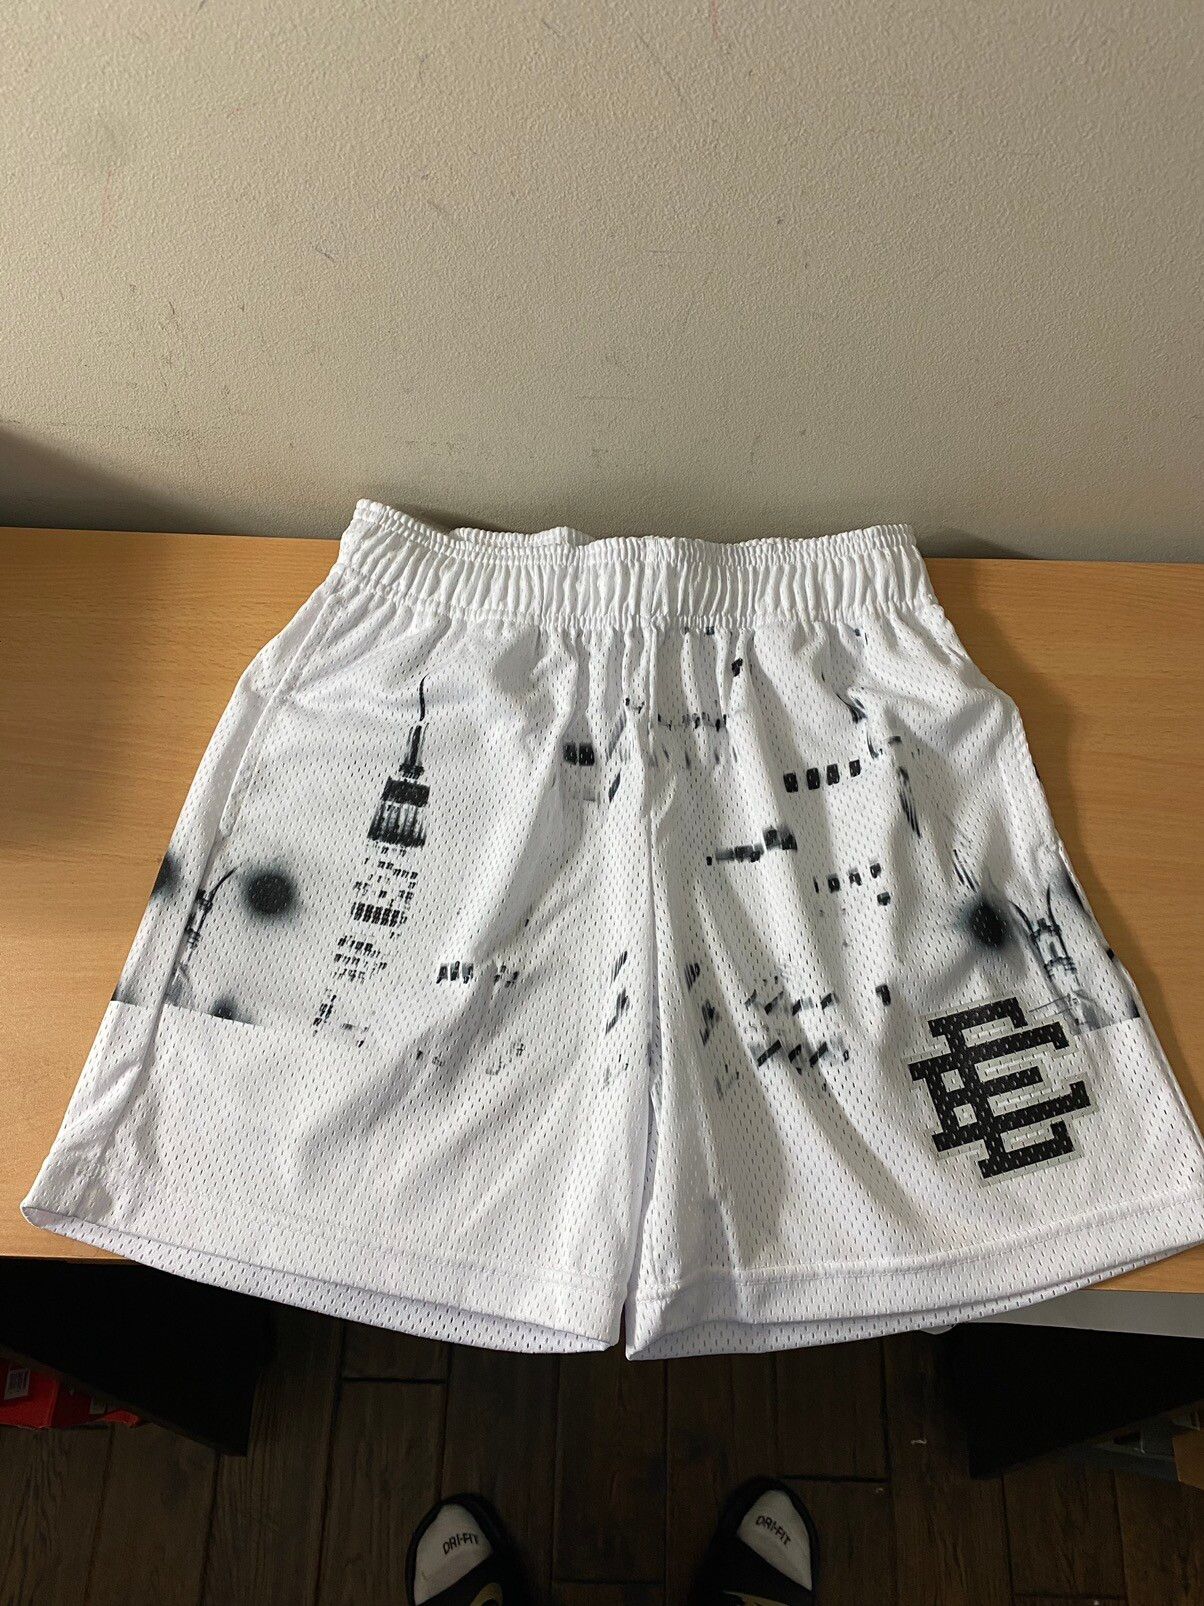 Eric Emanuel EE White Skyline Shorts (M) Size US 32 / EU 48 - 1 Preview